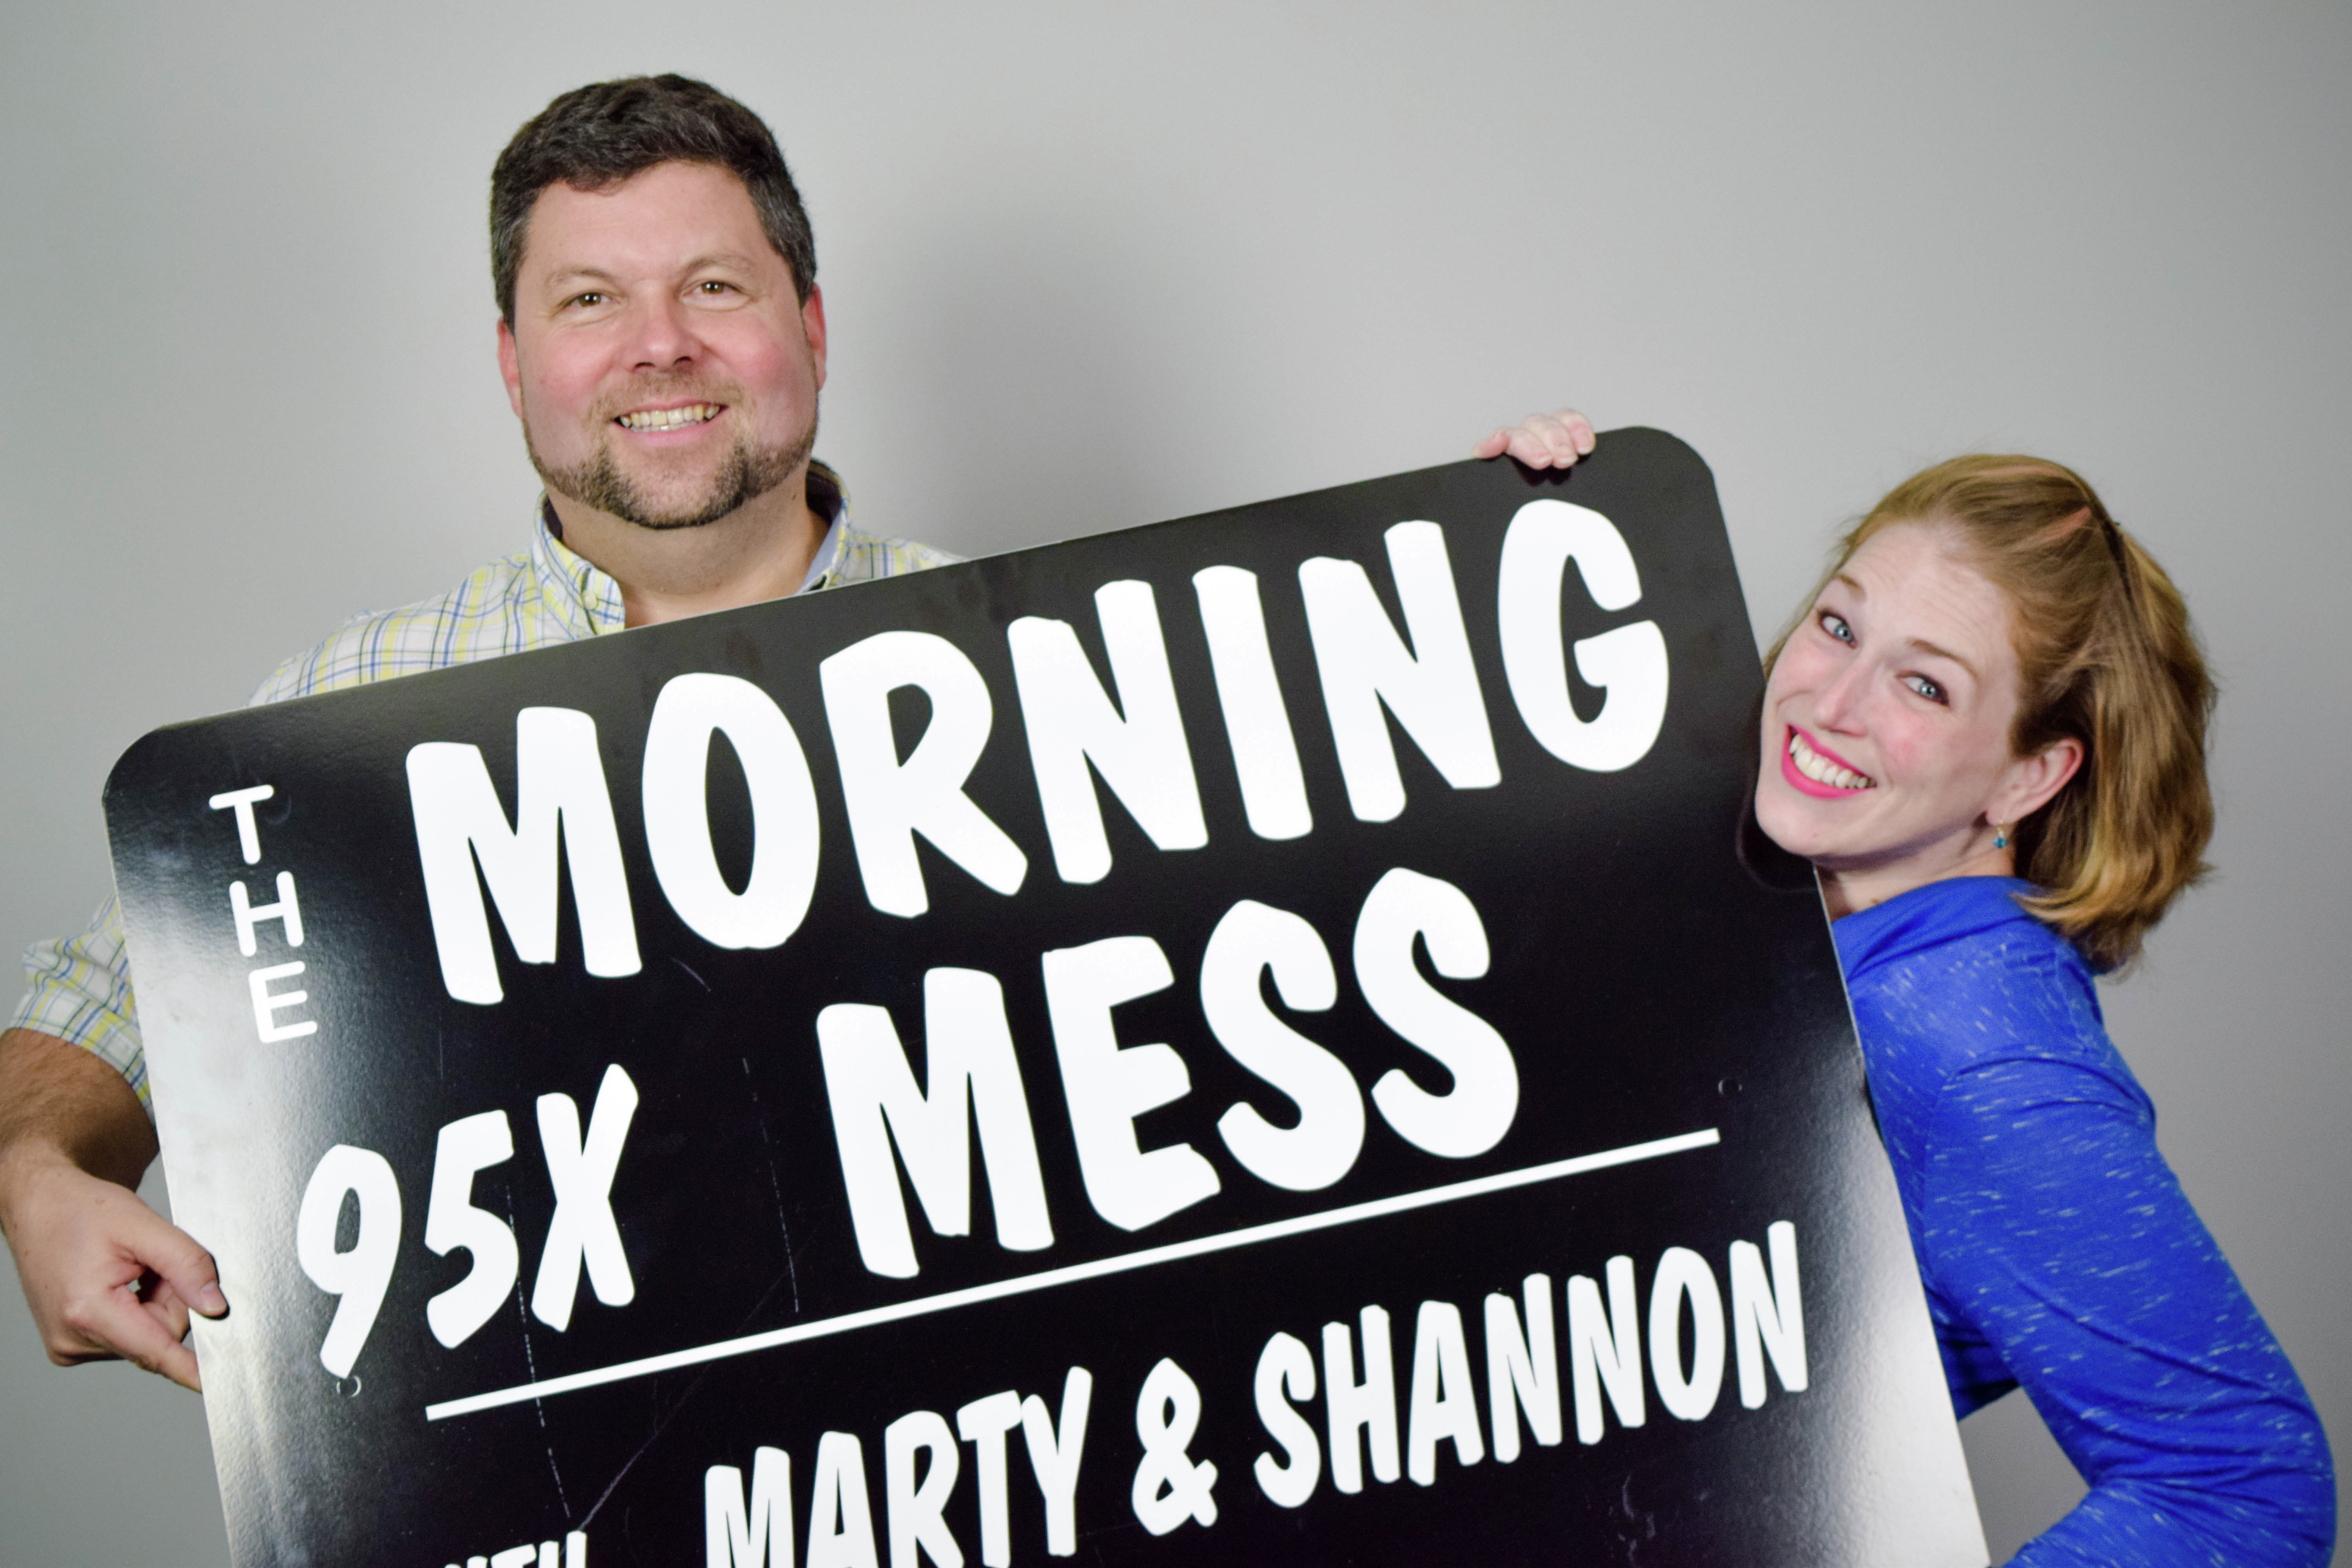 Marty & Shannon talk about  how a passenger beat the $76 check bag fee